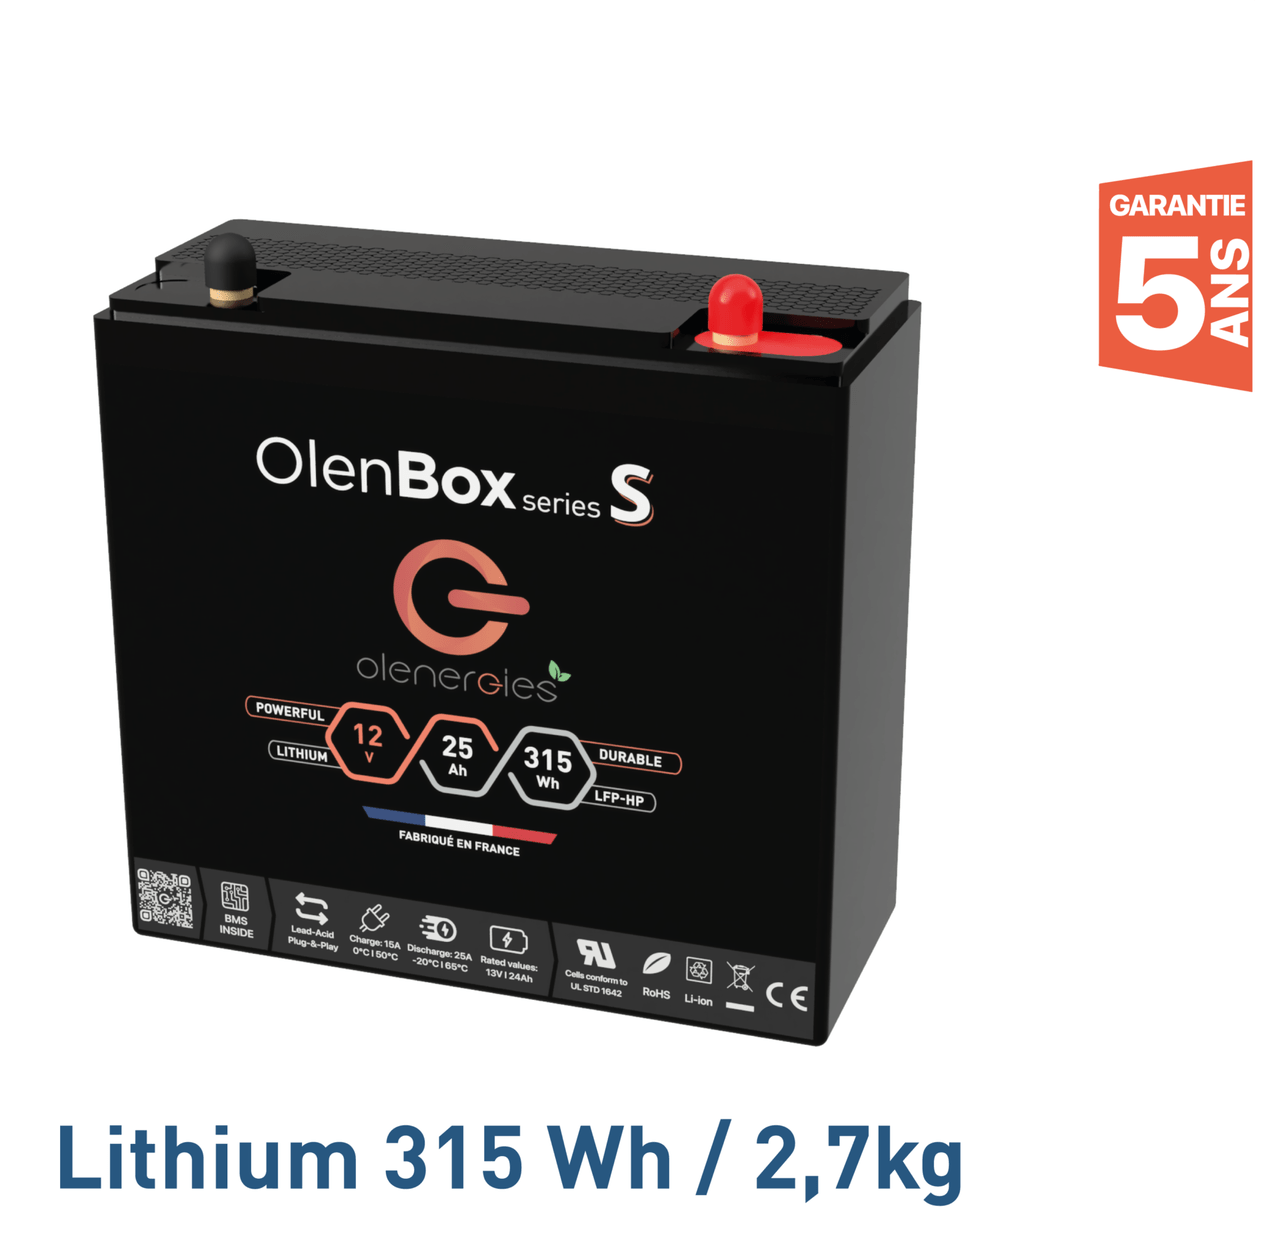 batterie olenbox lithium lfp serie s 315wh 12v France Battery Batterie Lithium OlenBox serie S - 315Wh The specialist in lithium batteries and electrical equipments